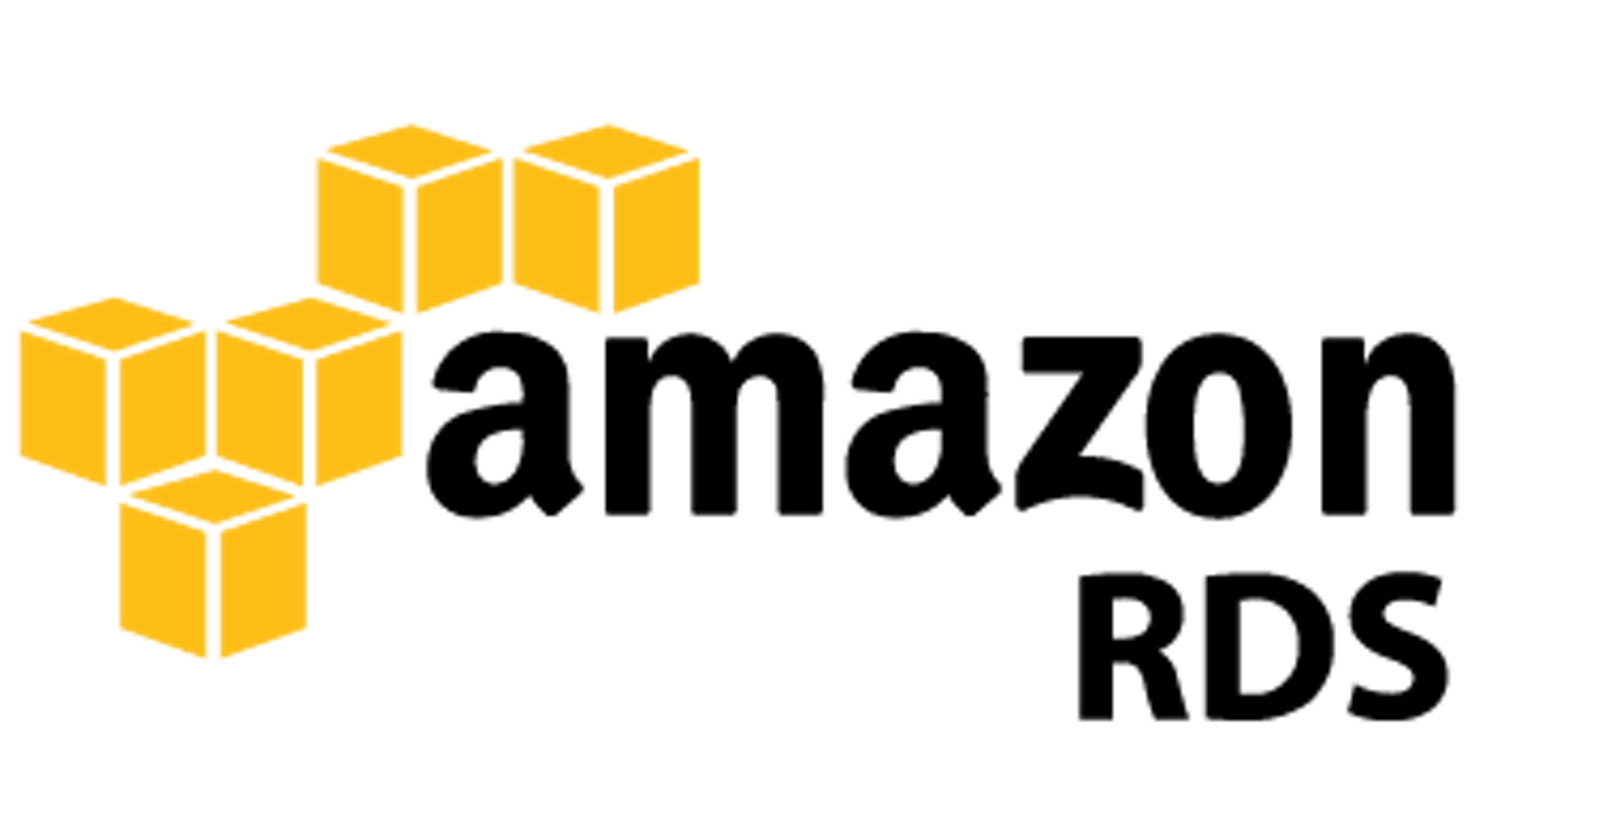 Day 44 - Relational Database Service in AWS